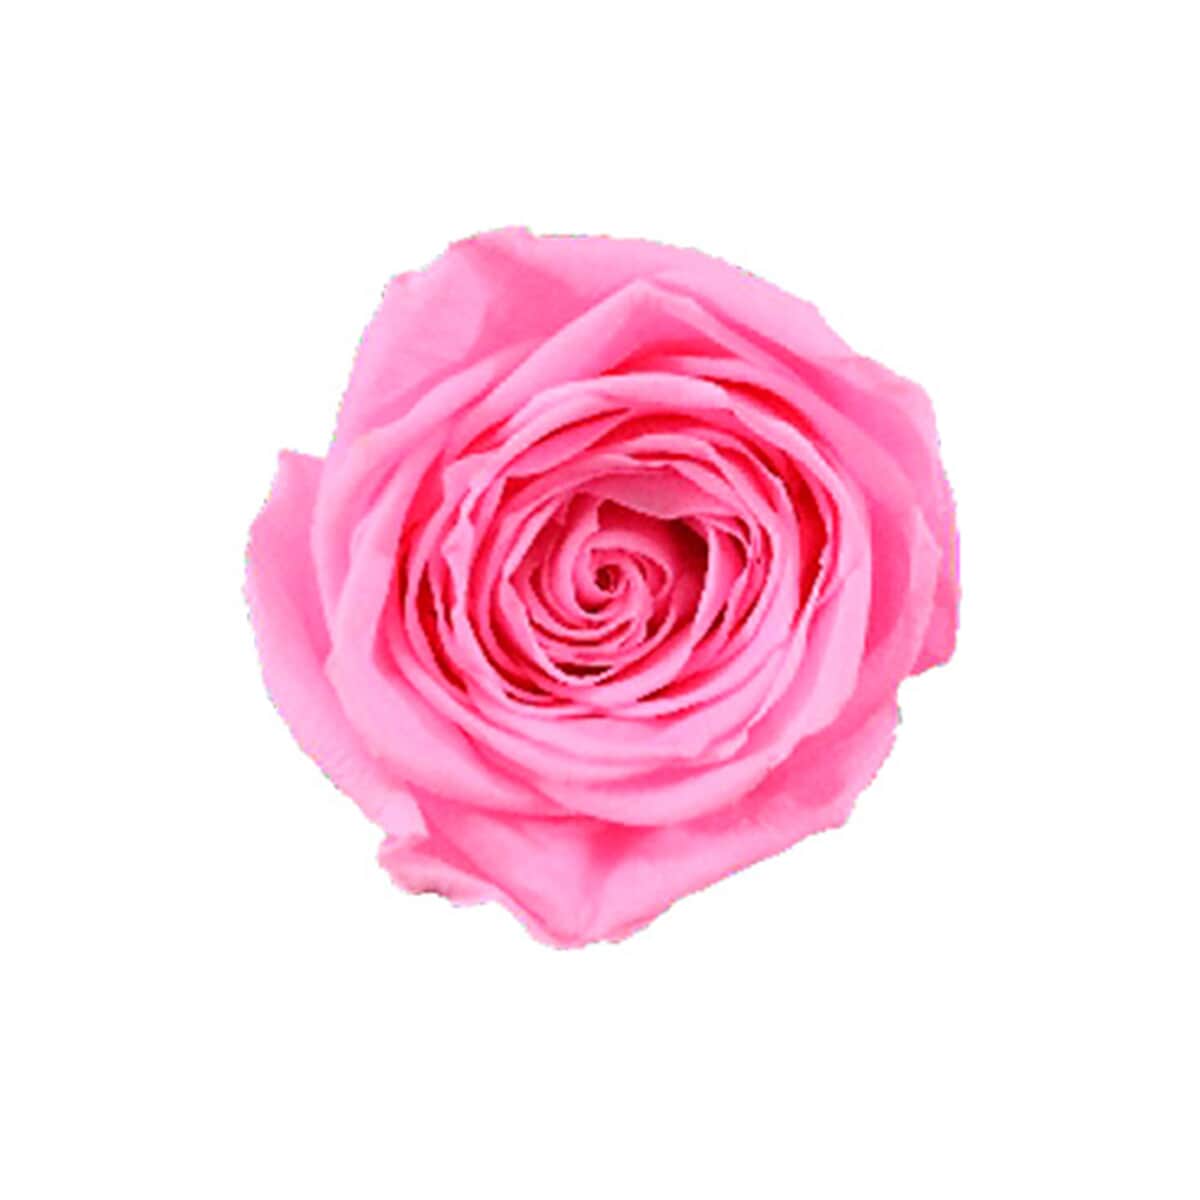 Real rose petal of different size on transparent background 22417839 PNG